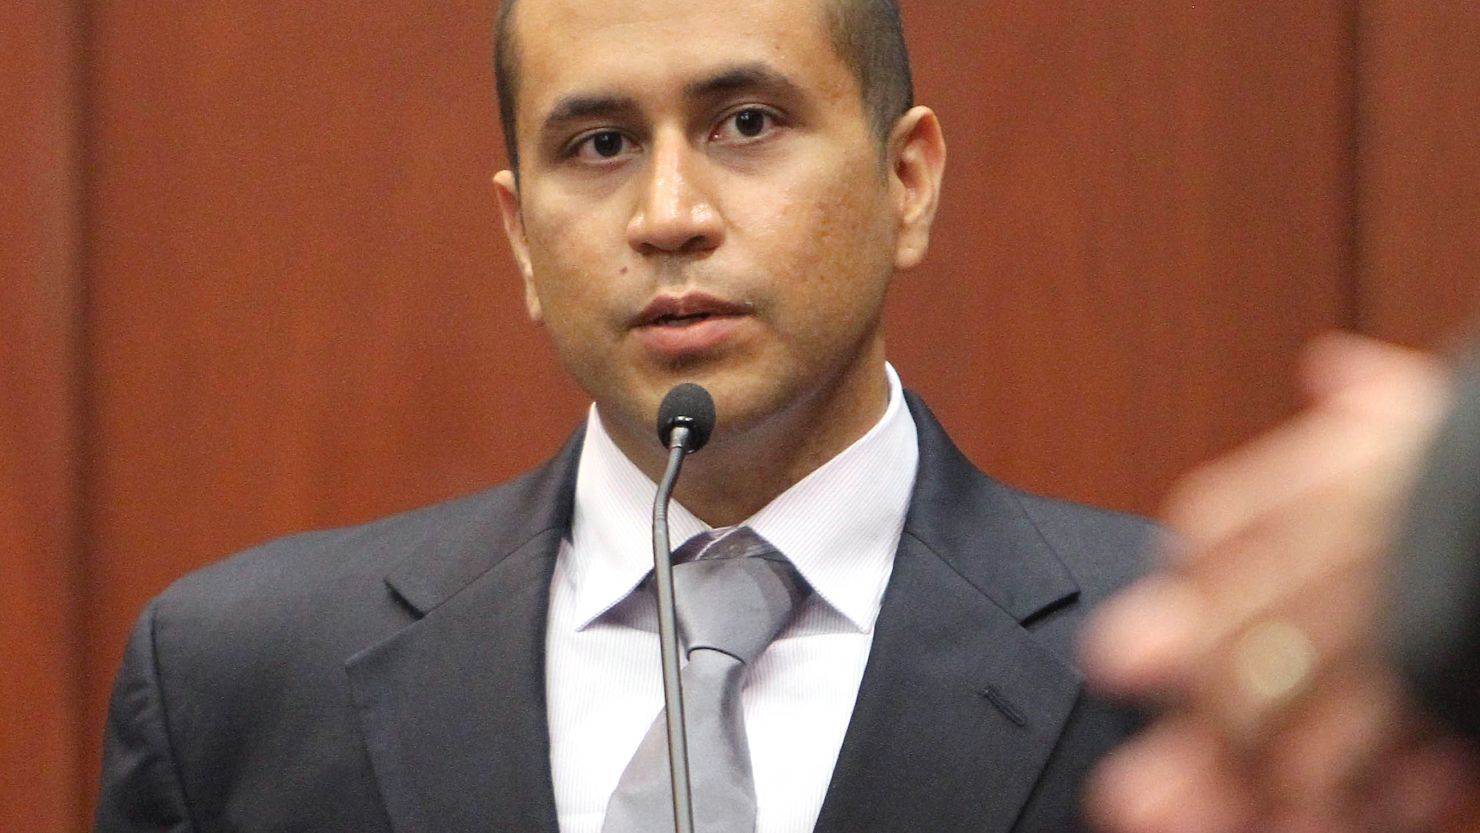 George Zimmerman has acknowledged killing Trayvon Martin in a shooting that highlighted U.S. race relations and gun laws.